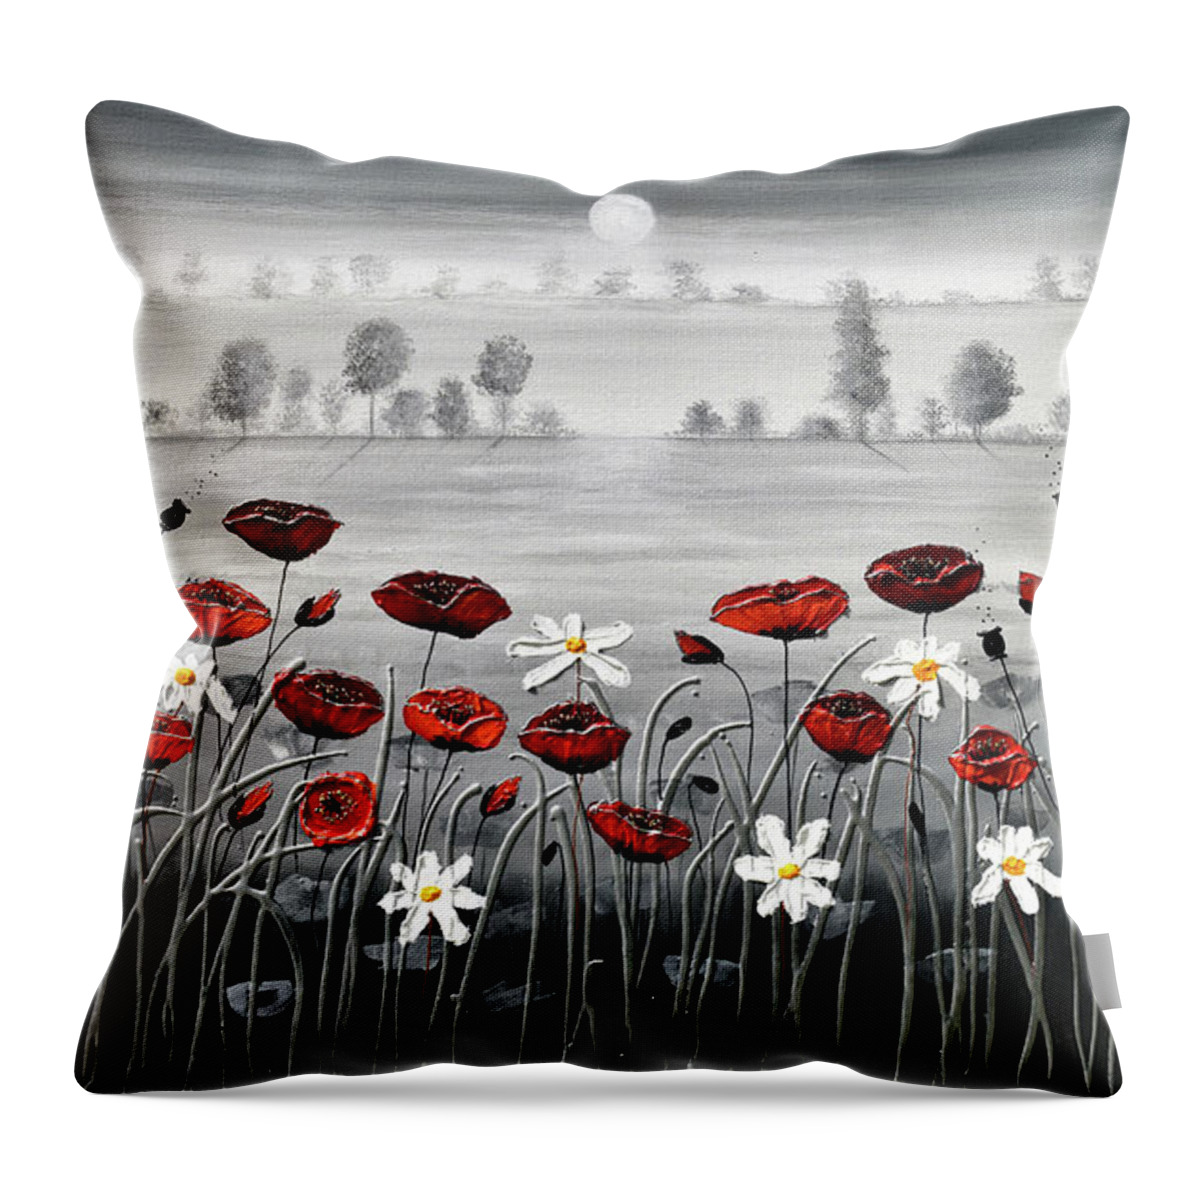 Red Poppies Throw Pillow featuring the painting In the Distance by Amanda Dagg